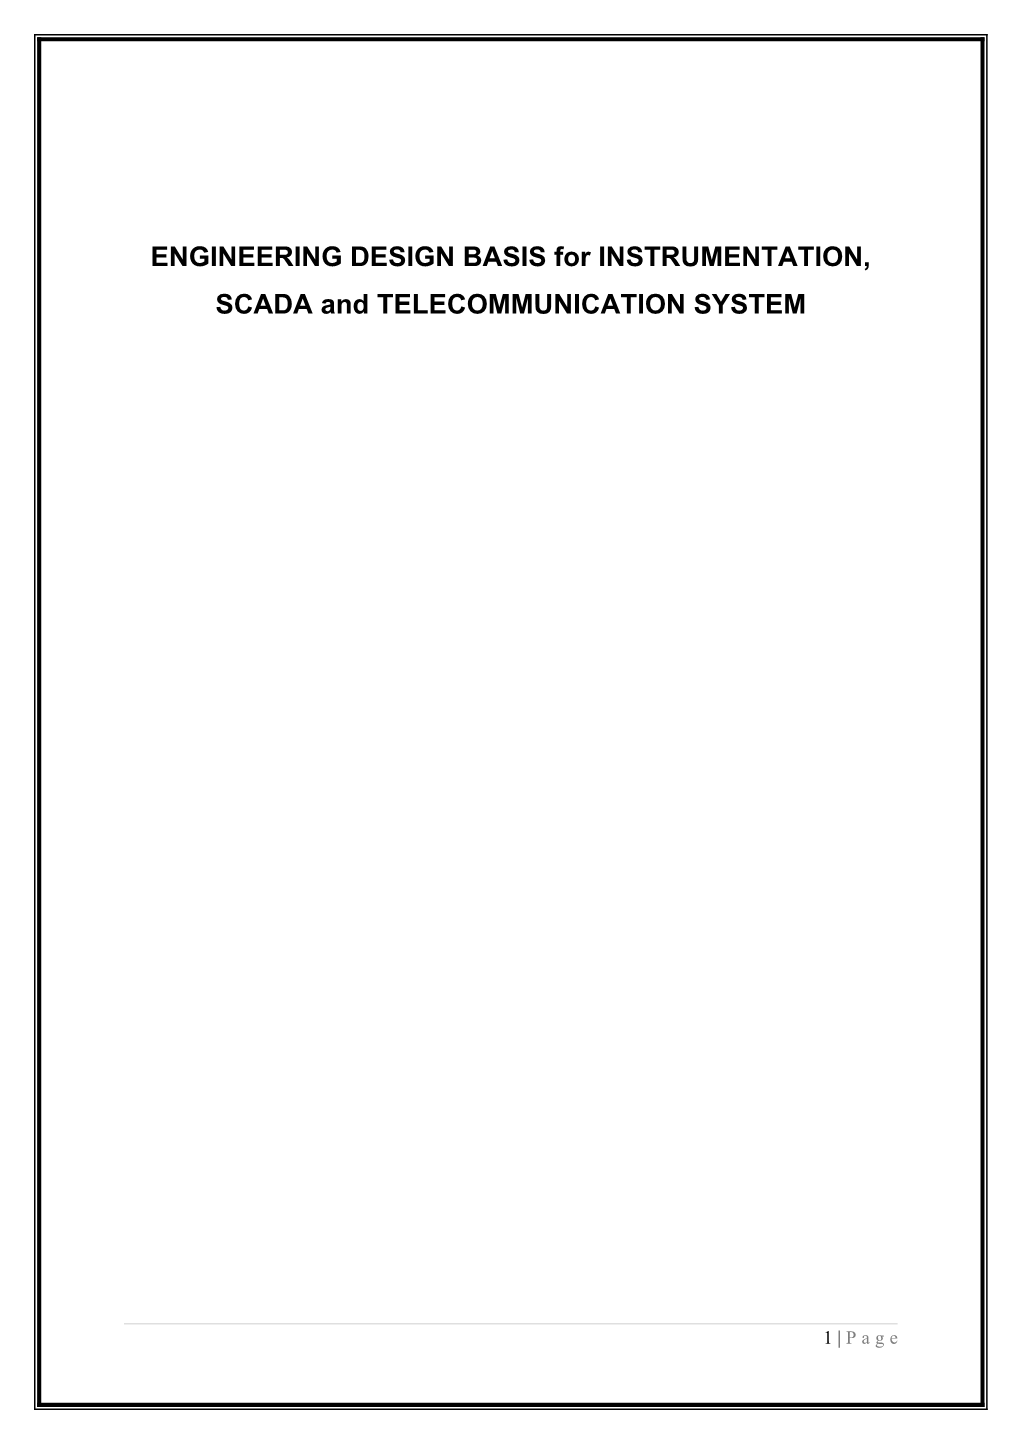 ENGINEERING DESIGN BASIS for INSTRUMENTATION, SCADA and TELECOMMUNICATION SYSTEM